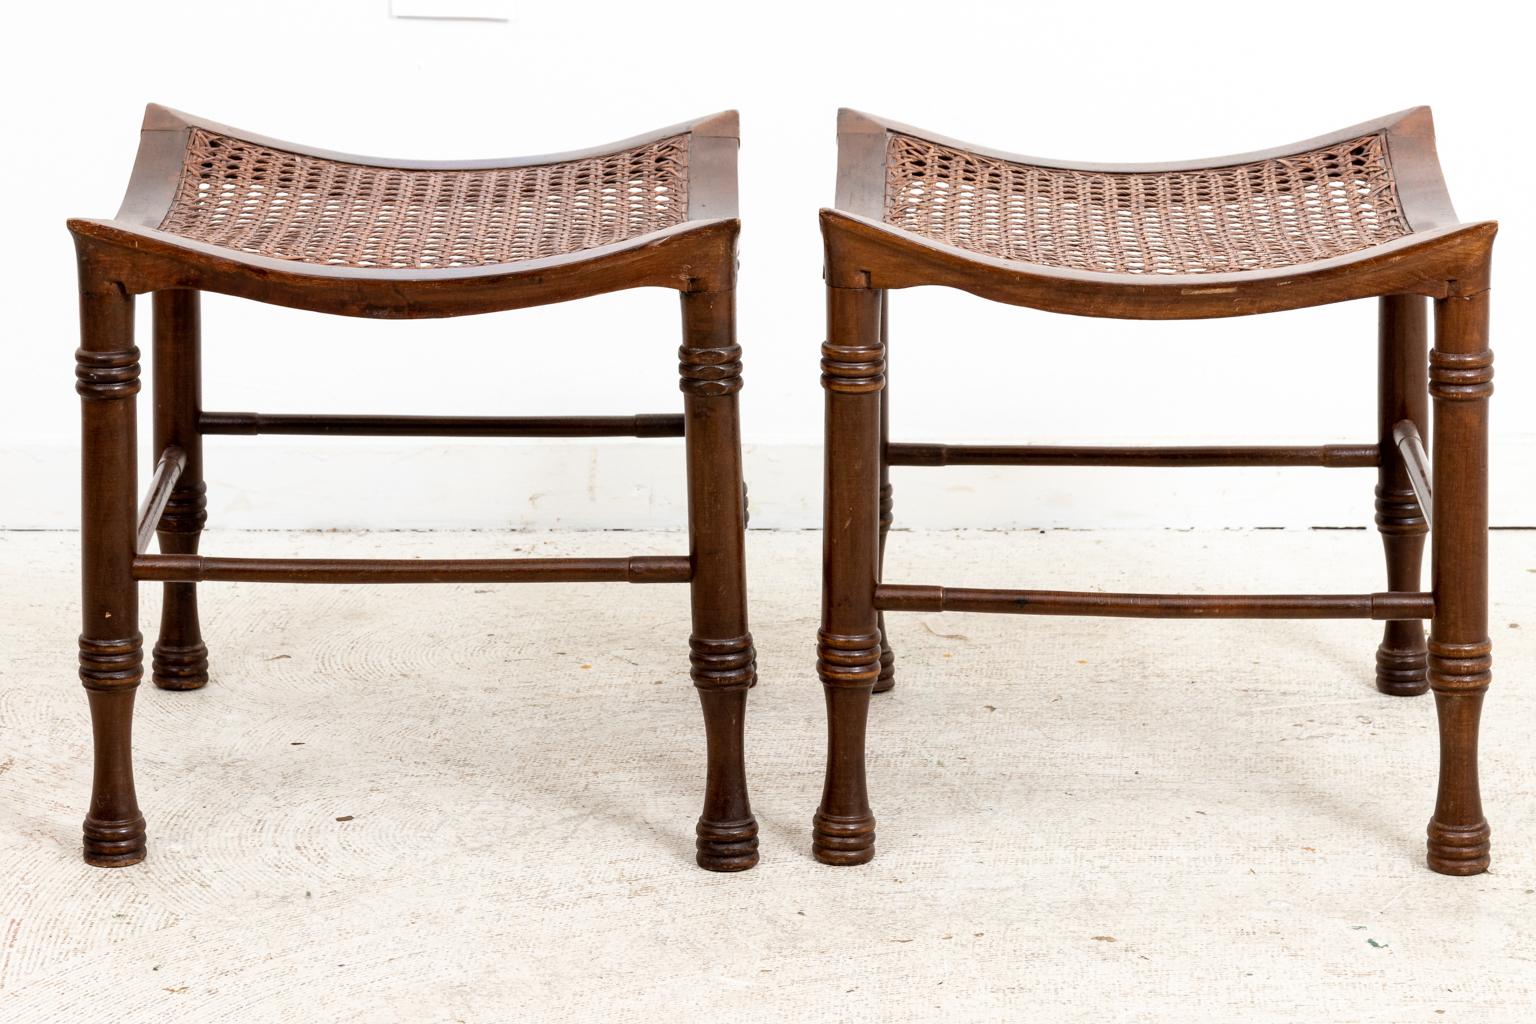 Pair of Liberty and Company Egyptian Revival Style Thebes Stools with Woven Seat 2